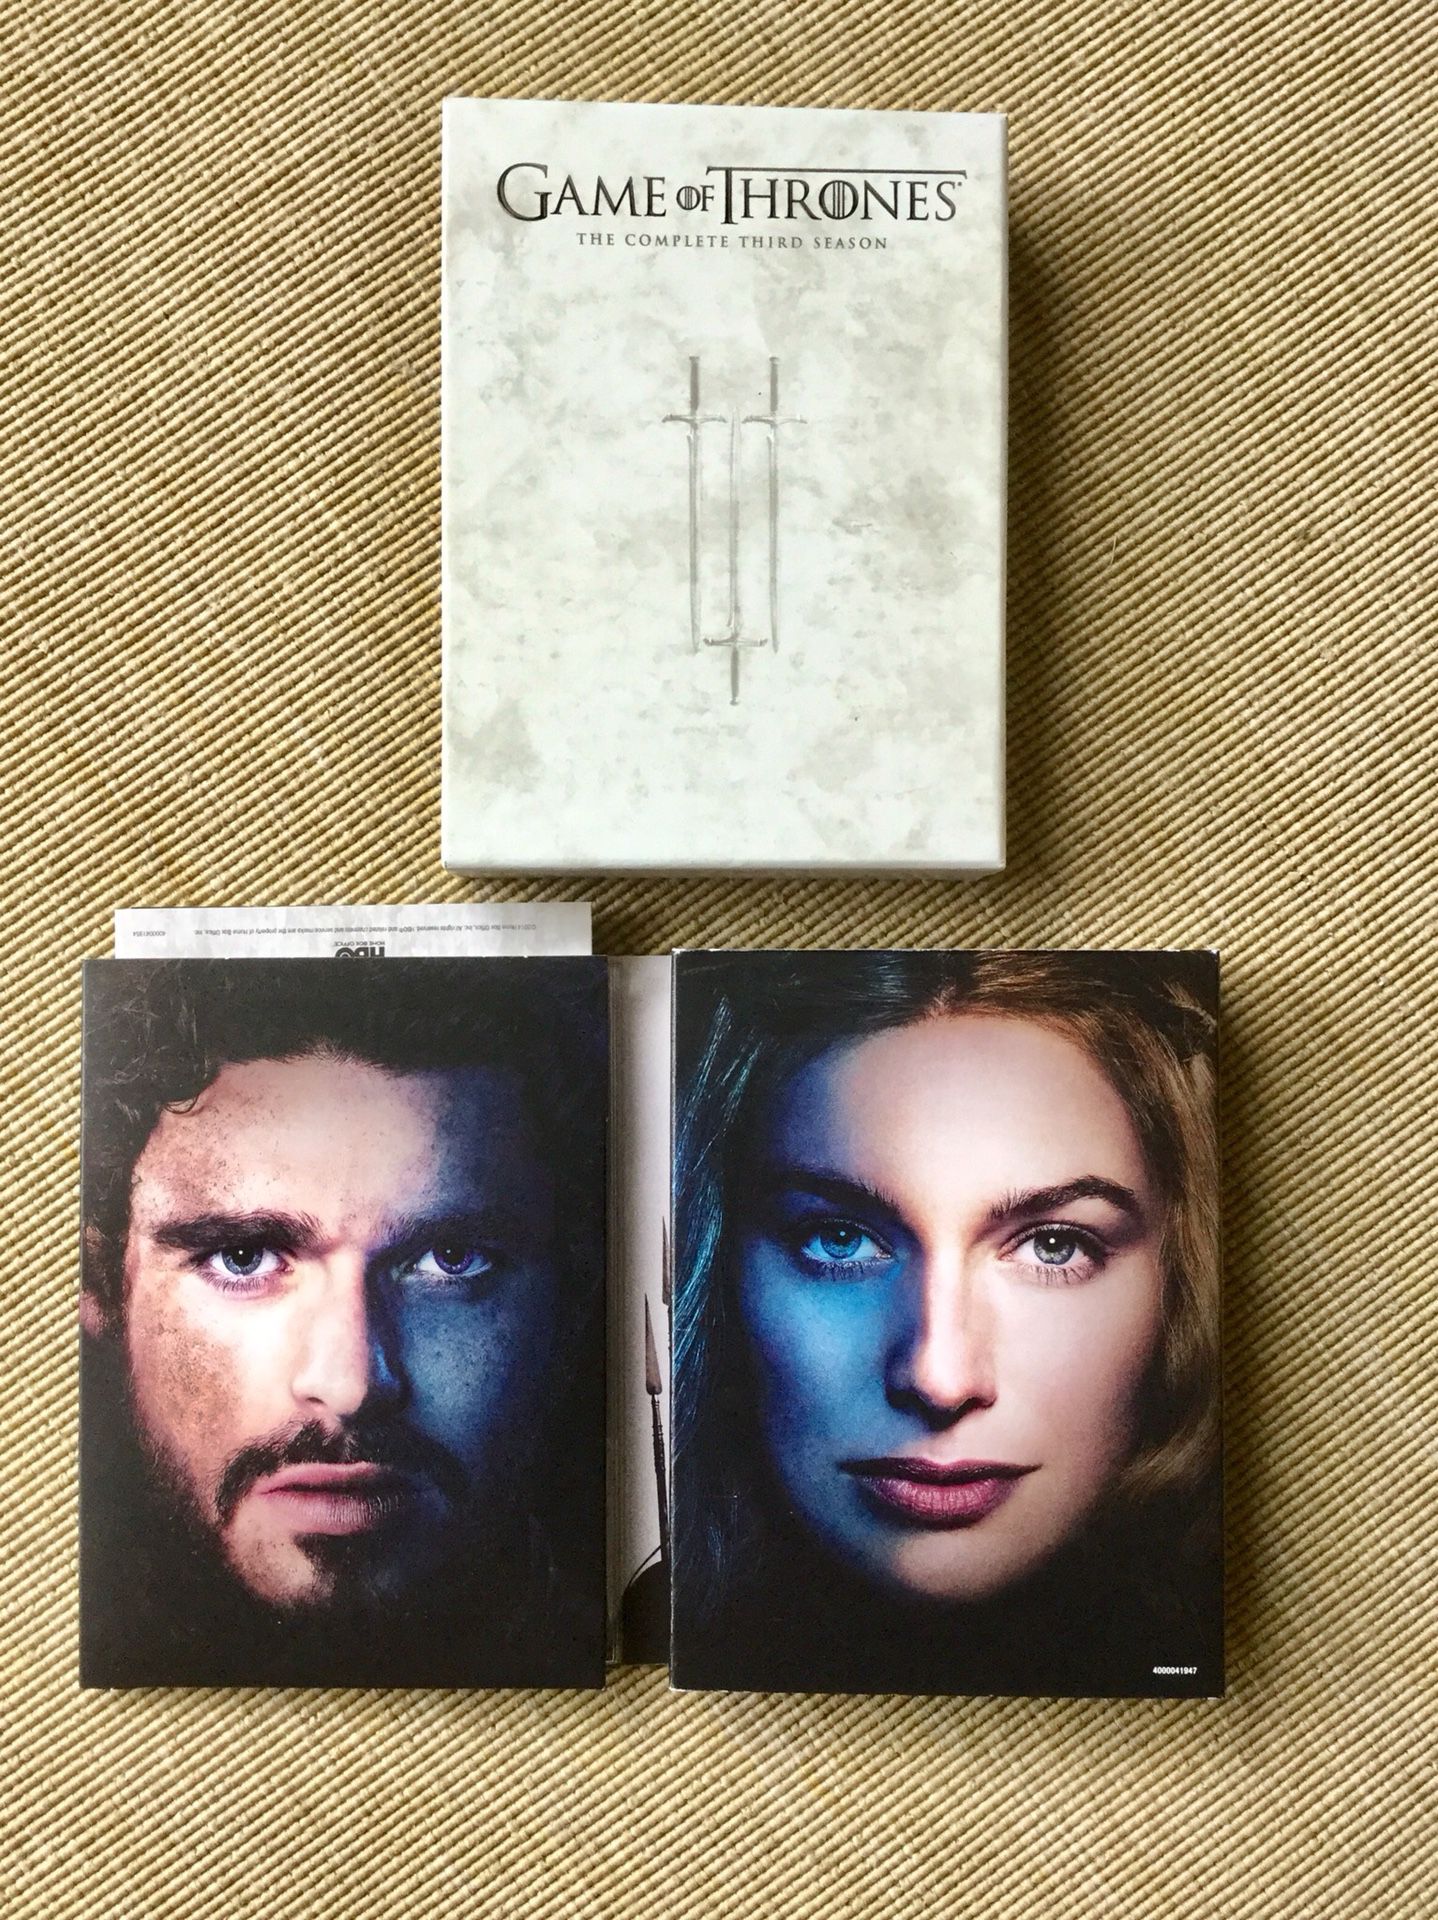 GAME OF THRONES 👑 SESON # 3 Complete 3 rd season 5 DVD disc 🎥📀📀📀📀💿 Excellent MOVIE ! 🍿